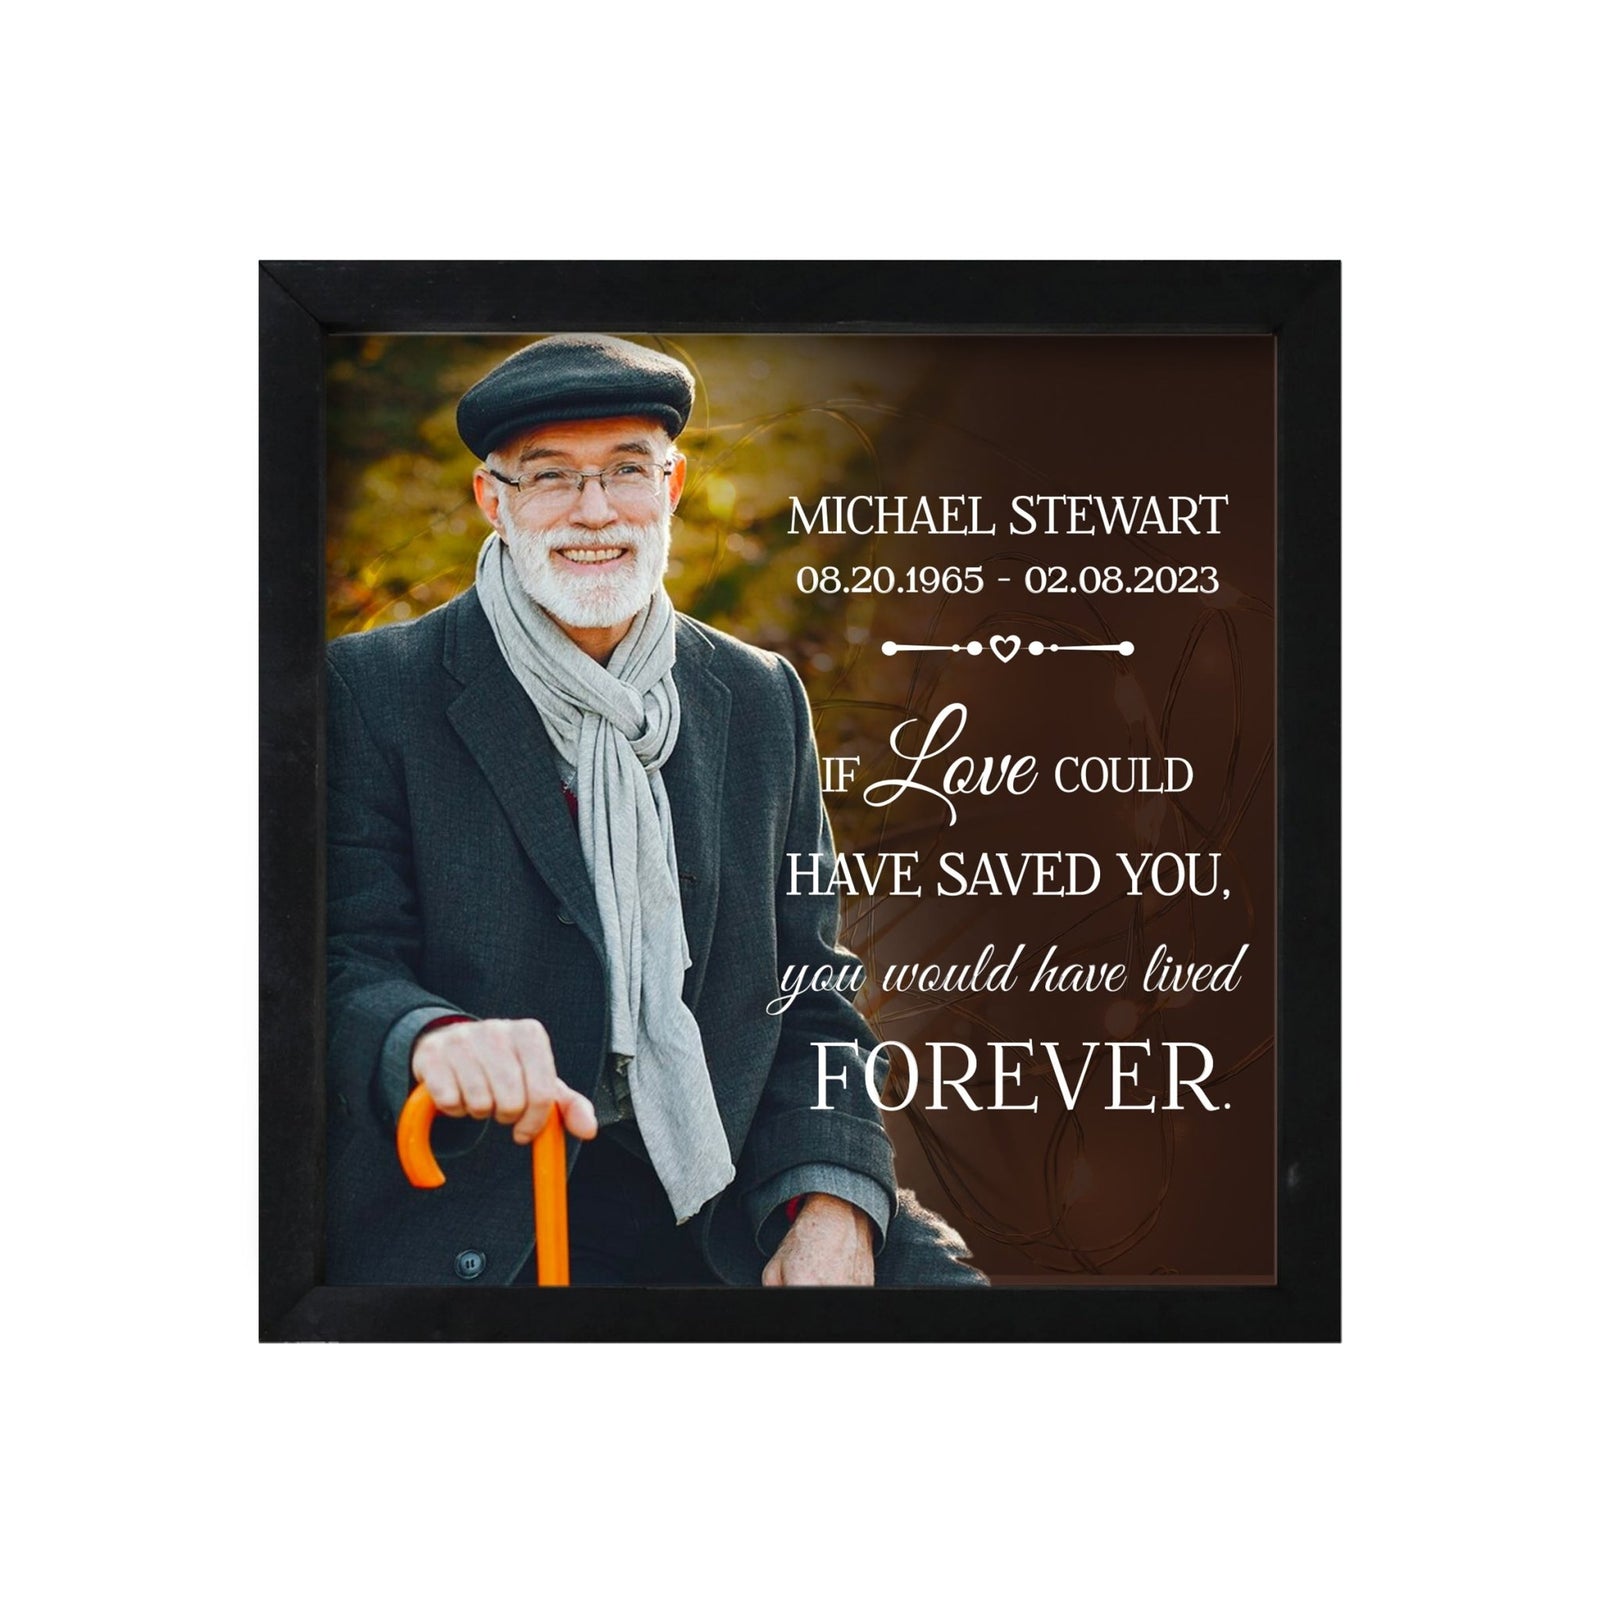 Personalized Memorial Black Framed Shadow Box With Lights Sympathy Gift & Wall Décor - If Love Could - LifeSong Milestones